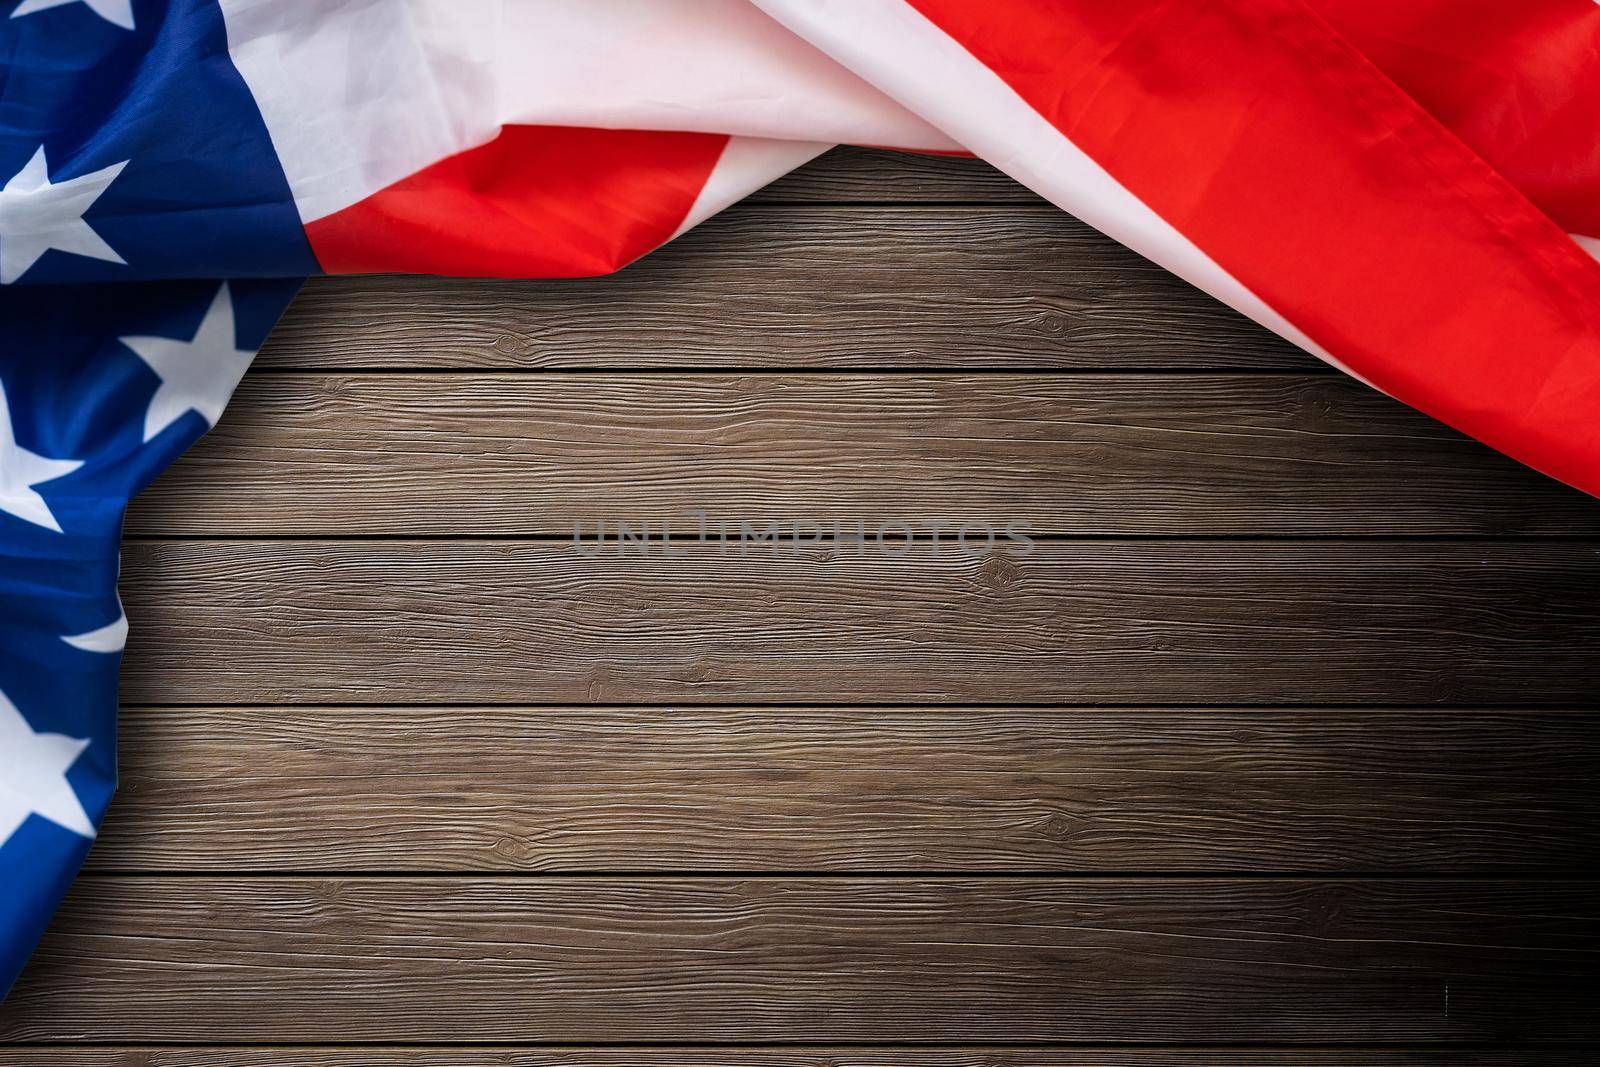 United States Flag on a rustic wooden table with copyspace